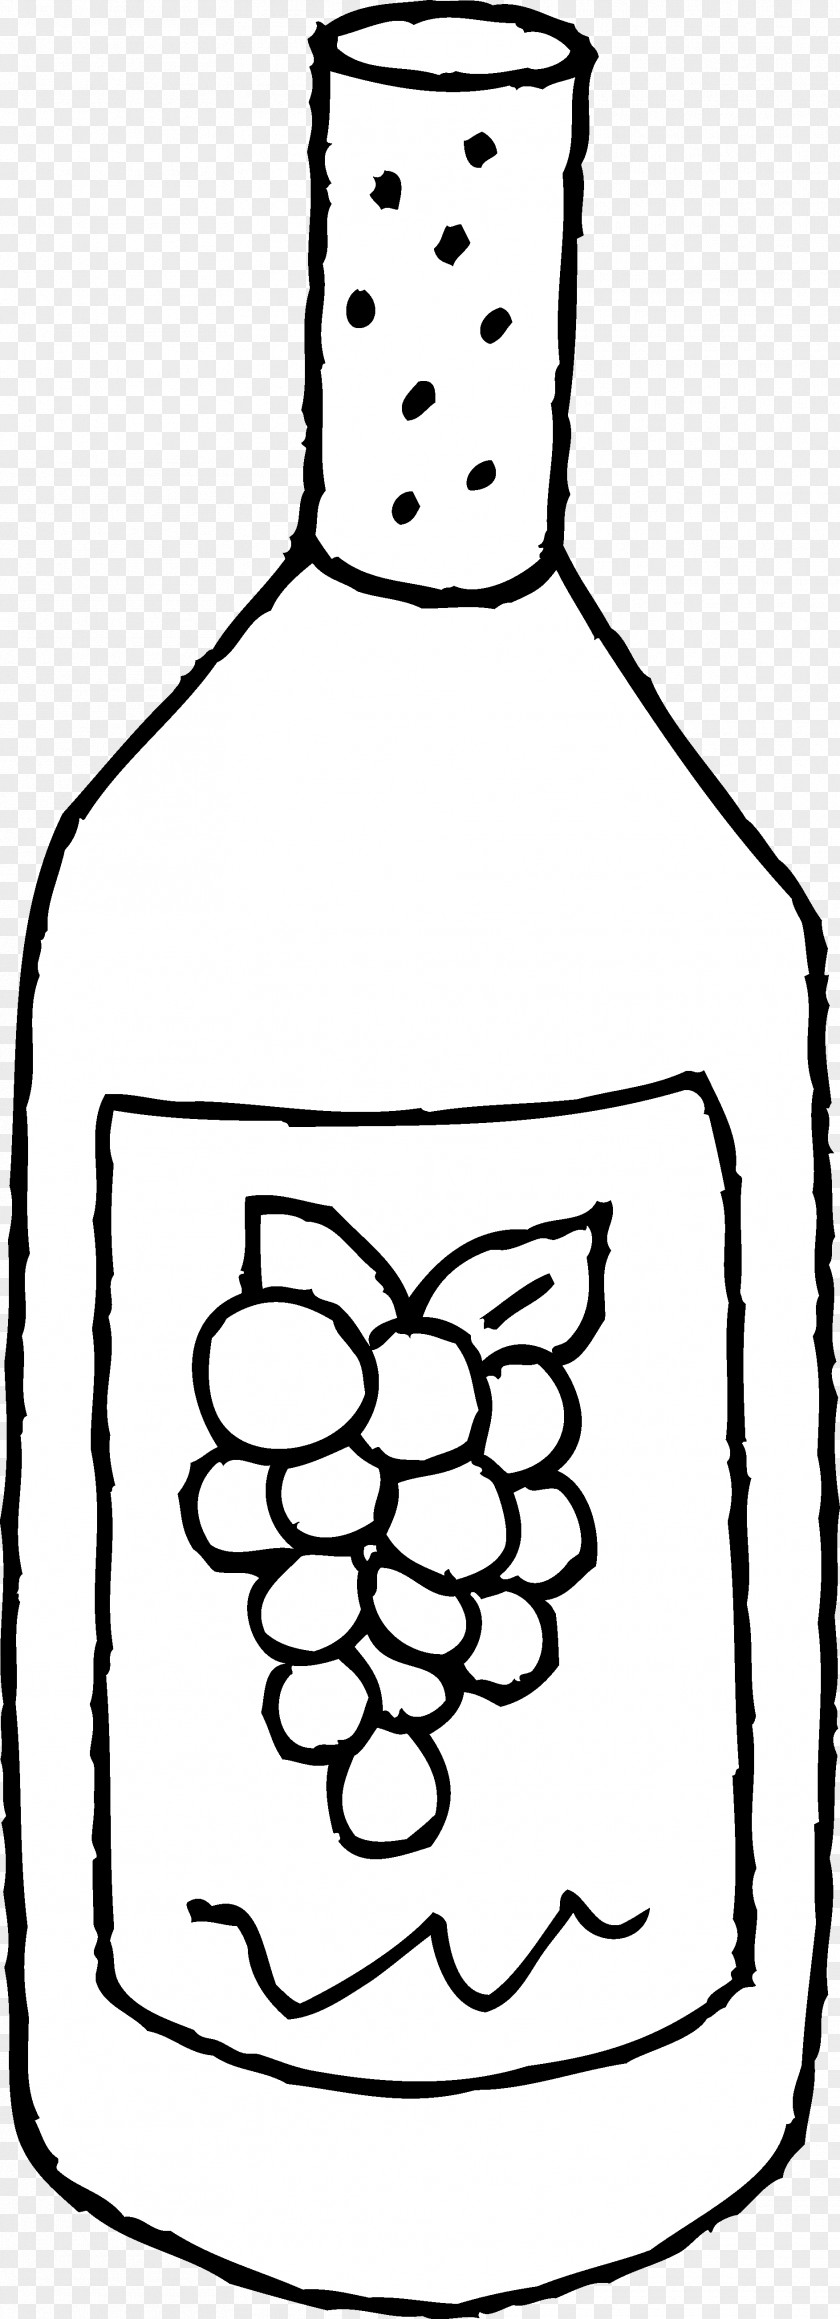 Pictures Of Bottles Wine Fizzy Drinks Coloring Book Bottle Clip Art PNG